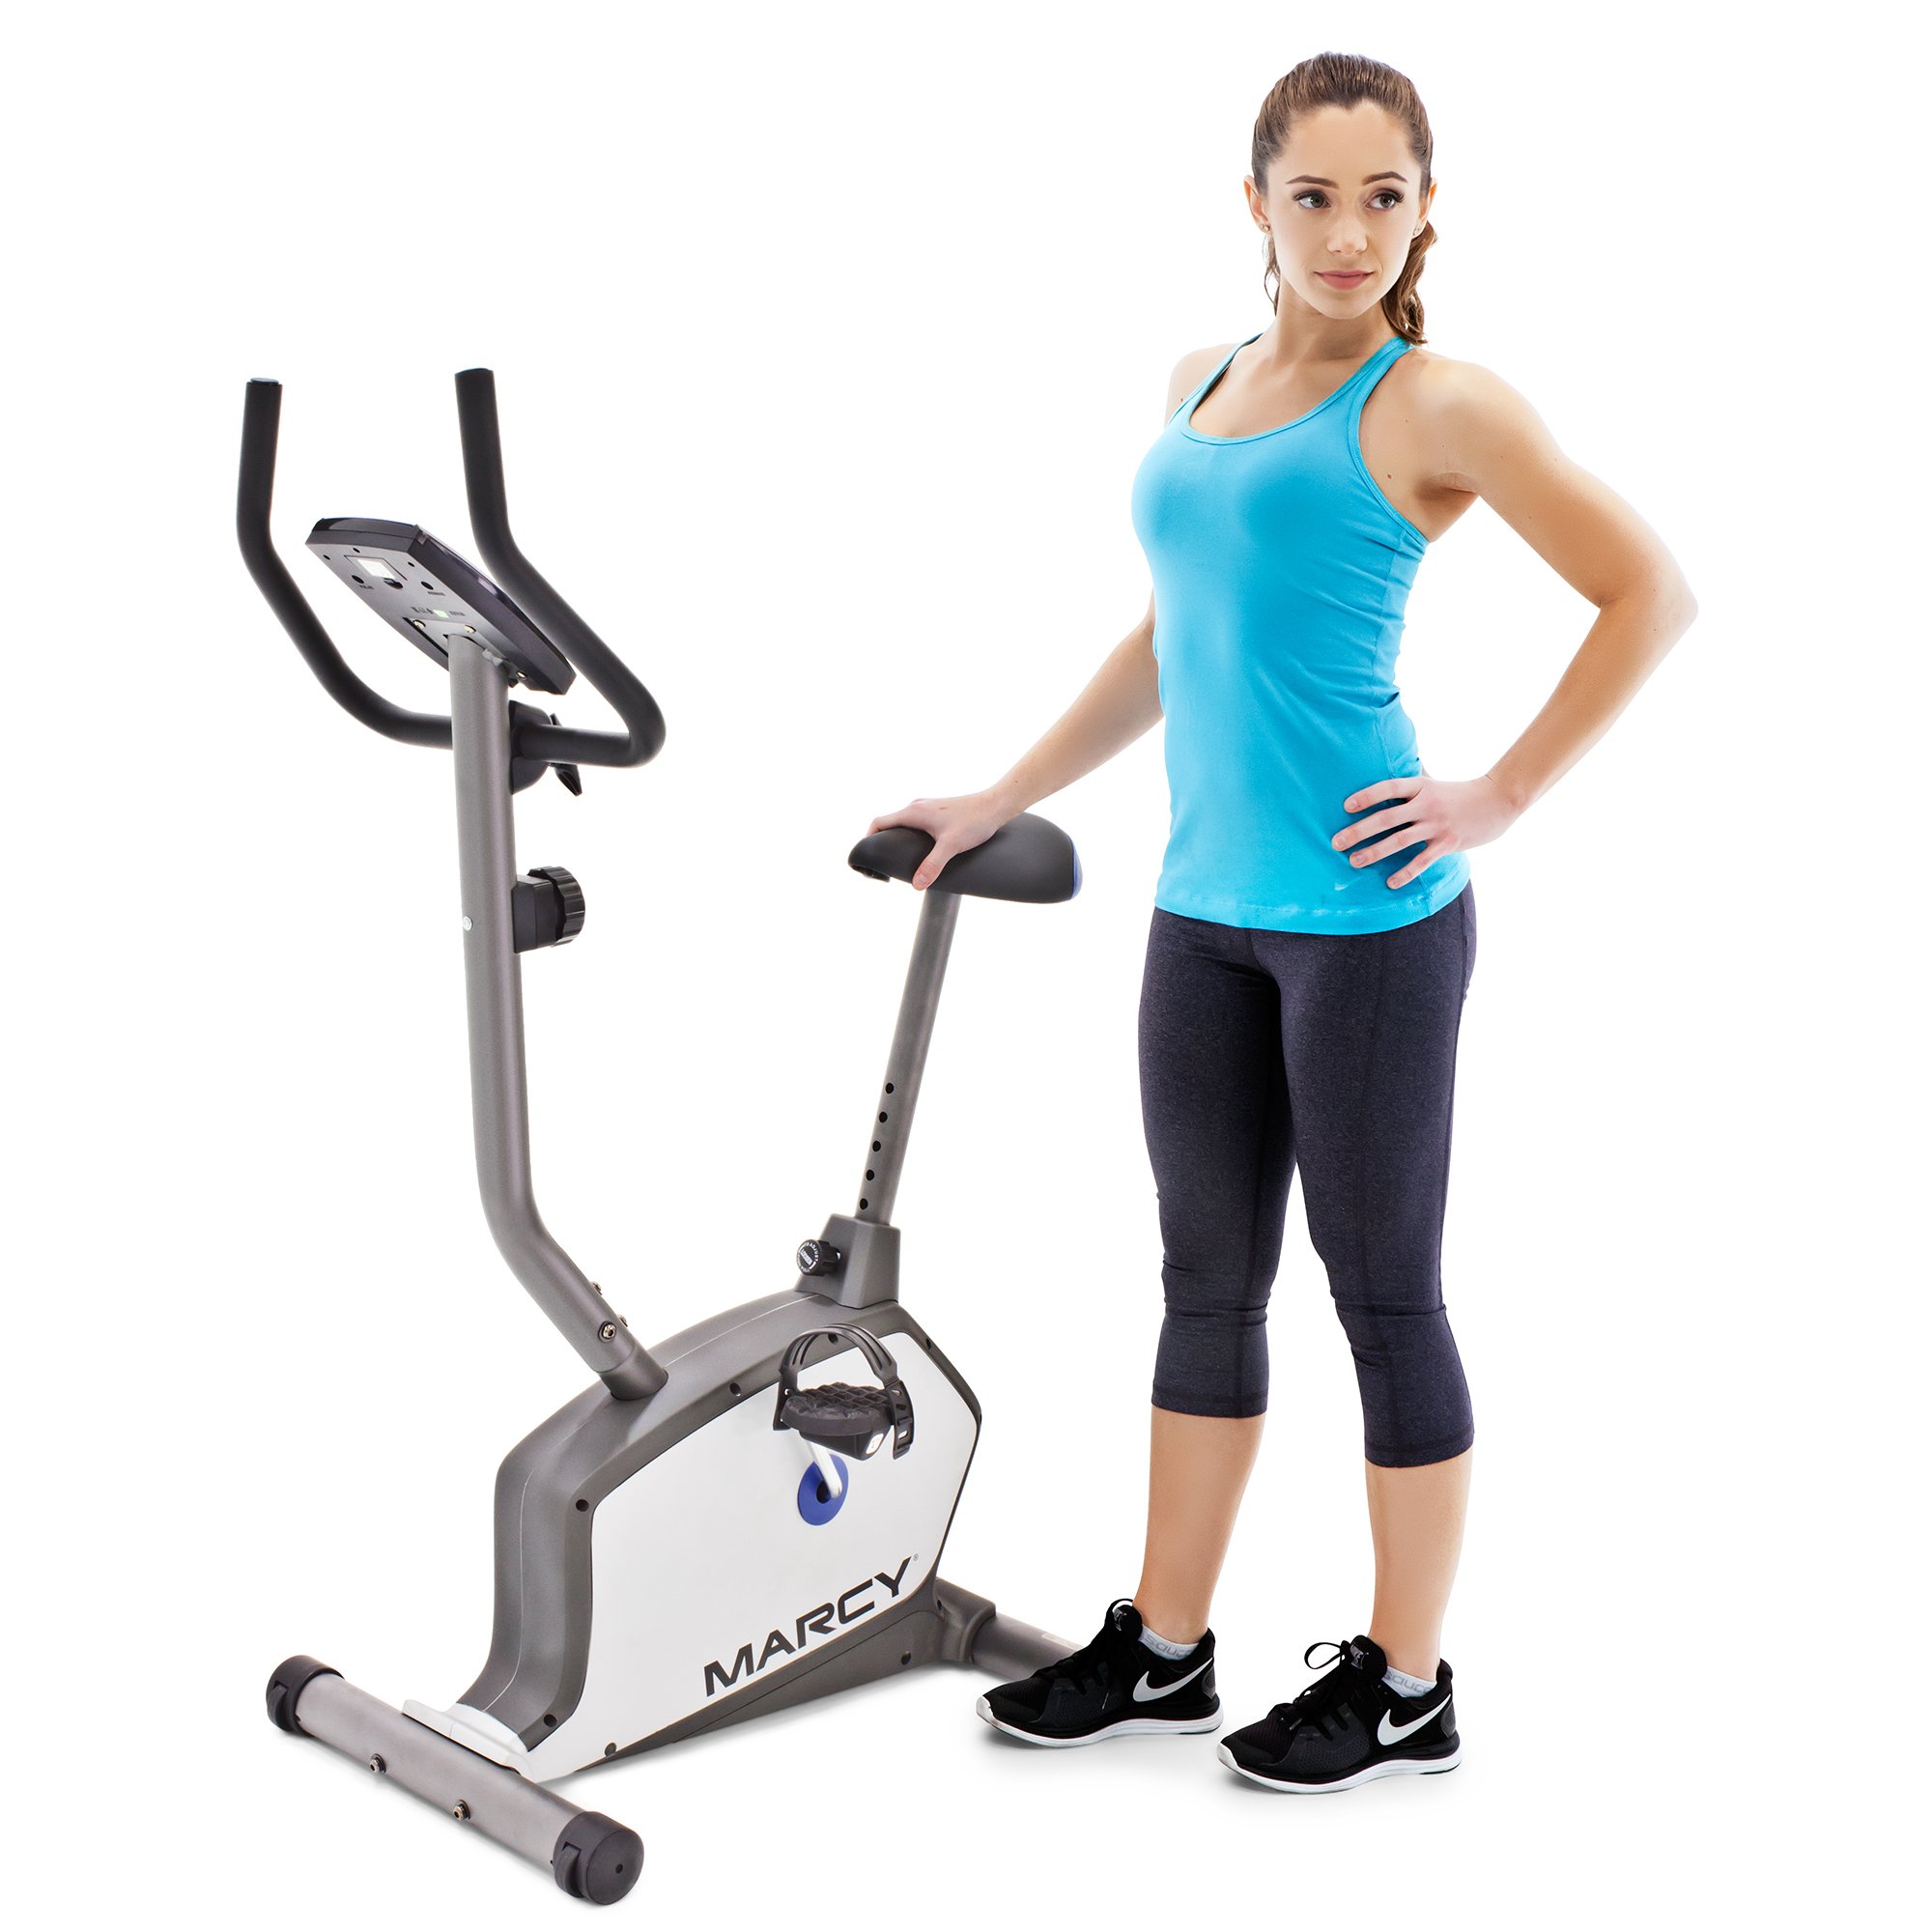 Marcy Upright Exercise Bike with Adjustable Seat and 8 Magnetic Resistance Preset Levels NS-1201U,Black/Grey/Silver